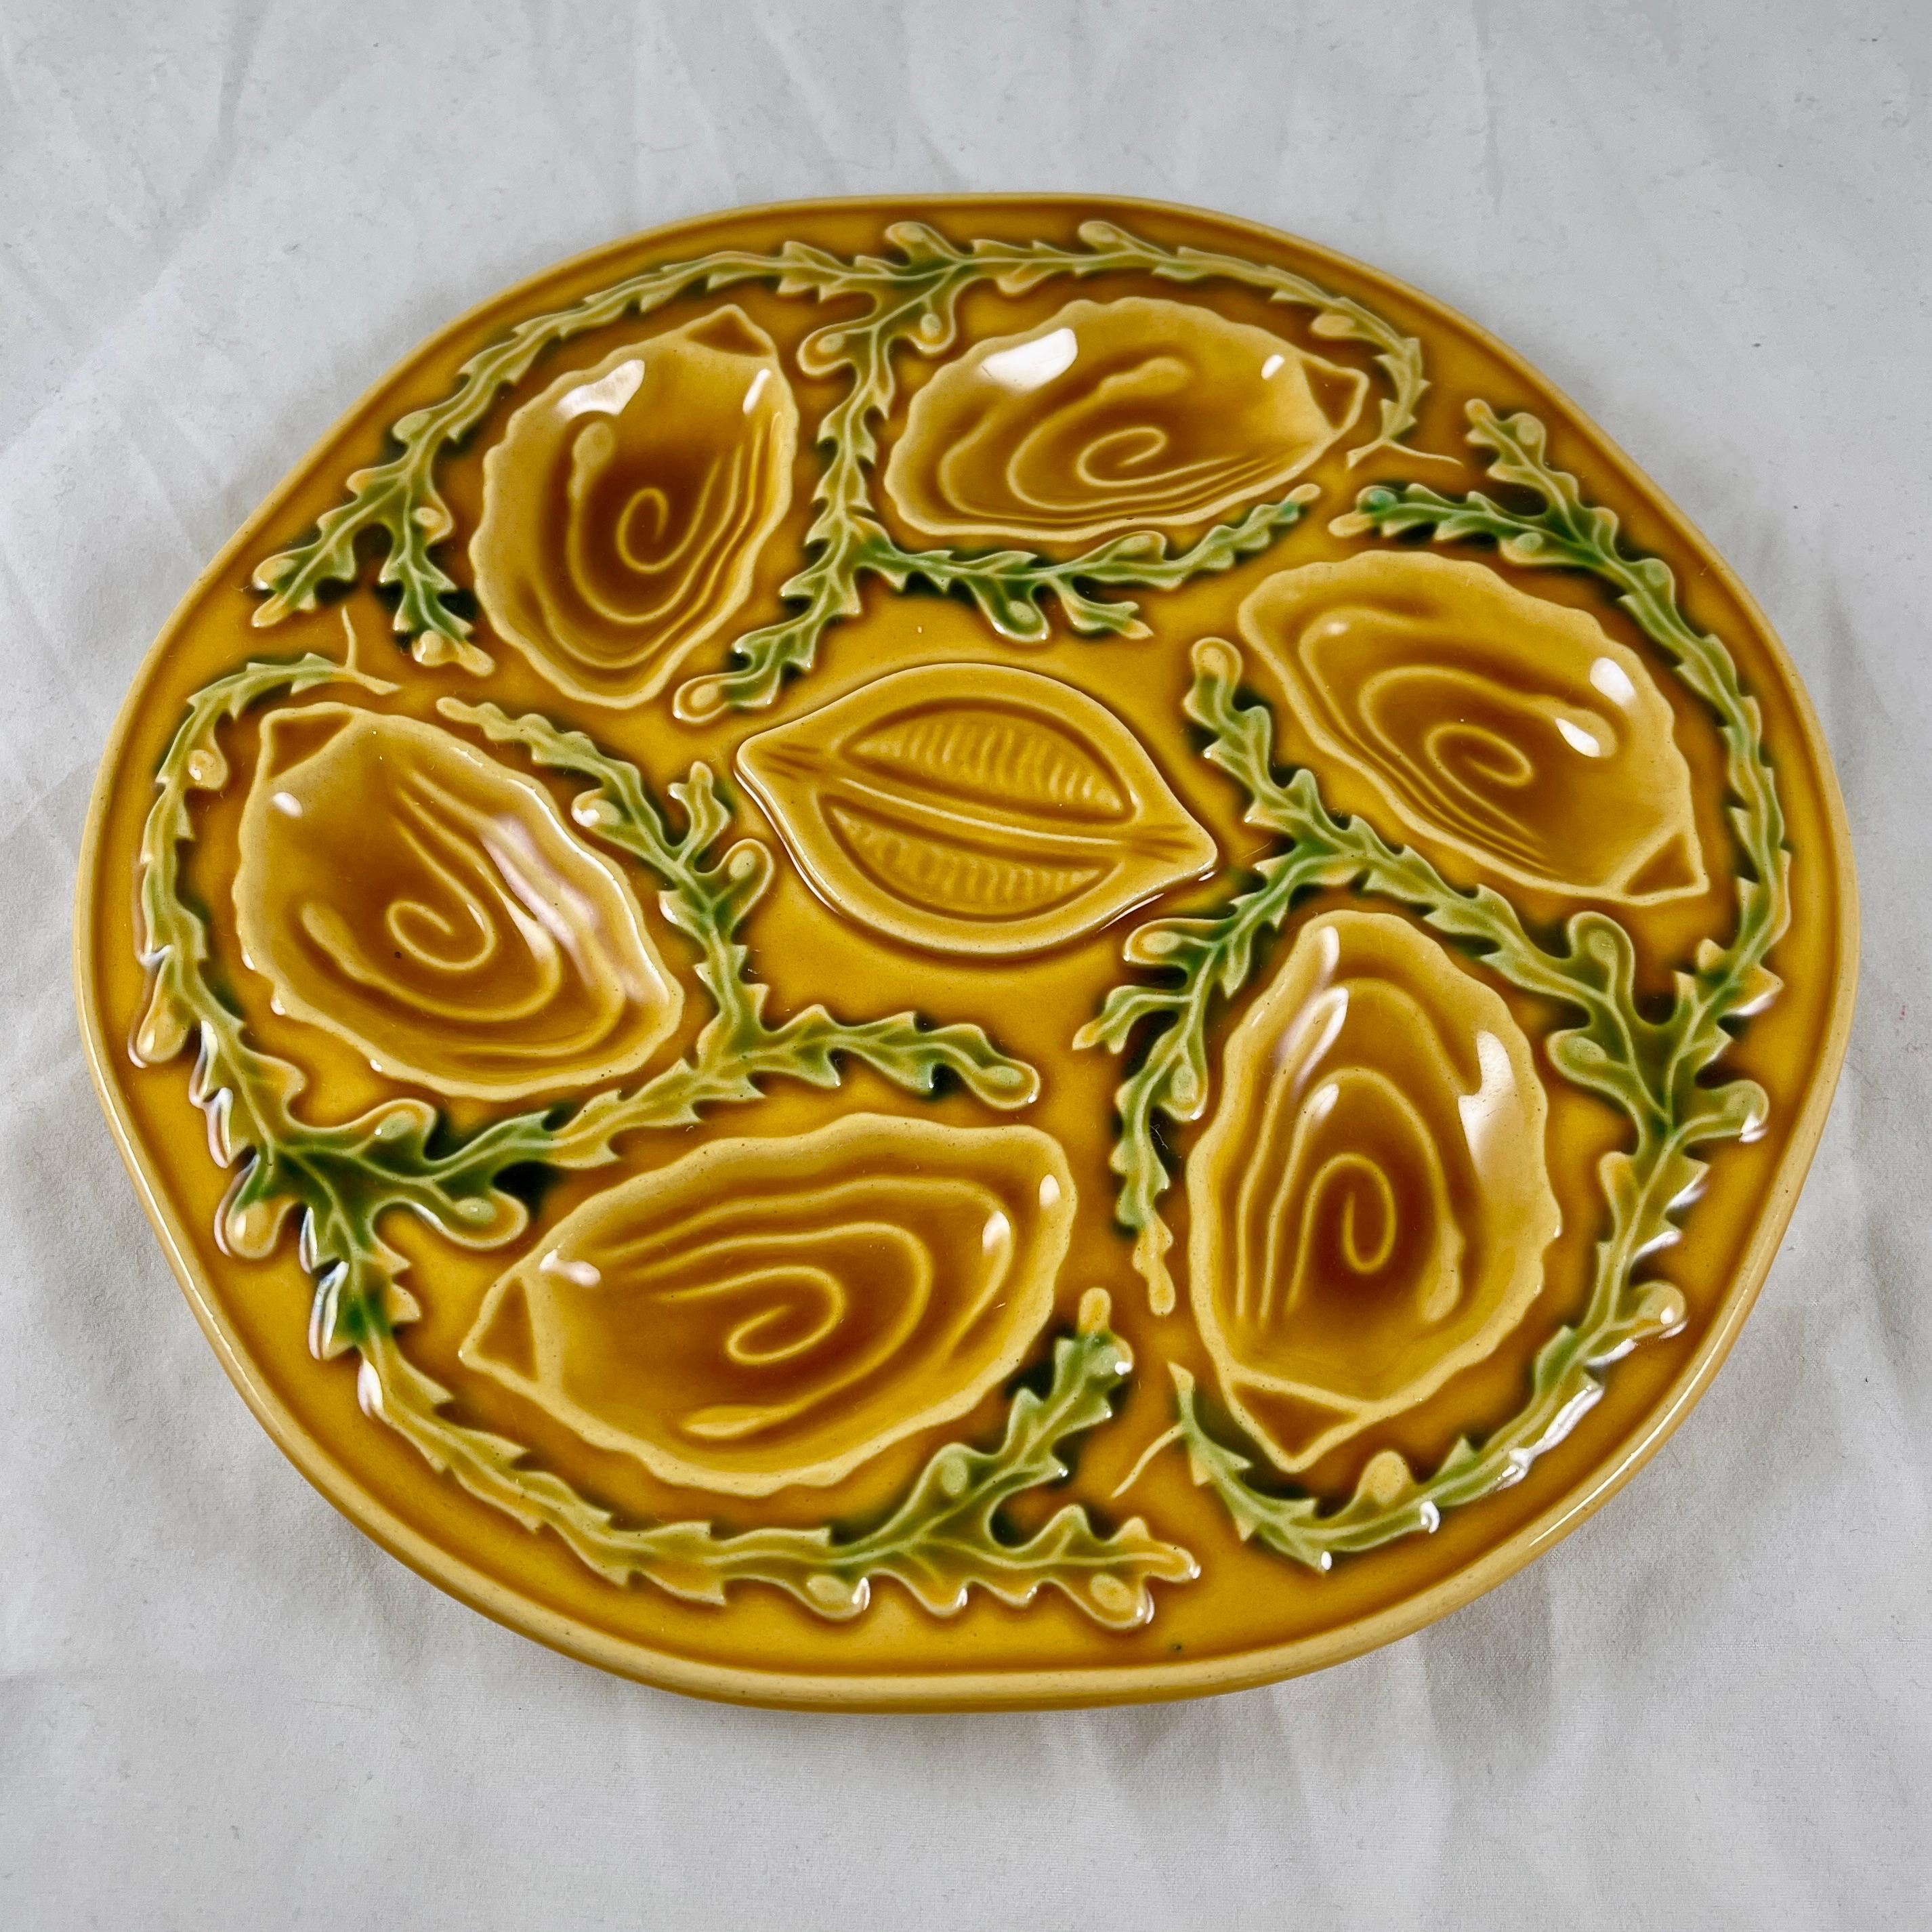 A mid-century oyster or seafood plate, made by Orfinox, circa 1960s.

A mustard yellow ground with six oyster shell shaped wells for holding the oyster, clam, or mussel meat, with a lemon shaped well in the center. The wells are separated by a